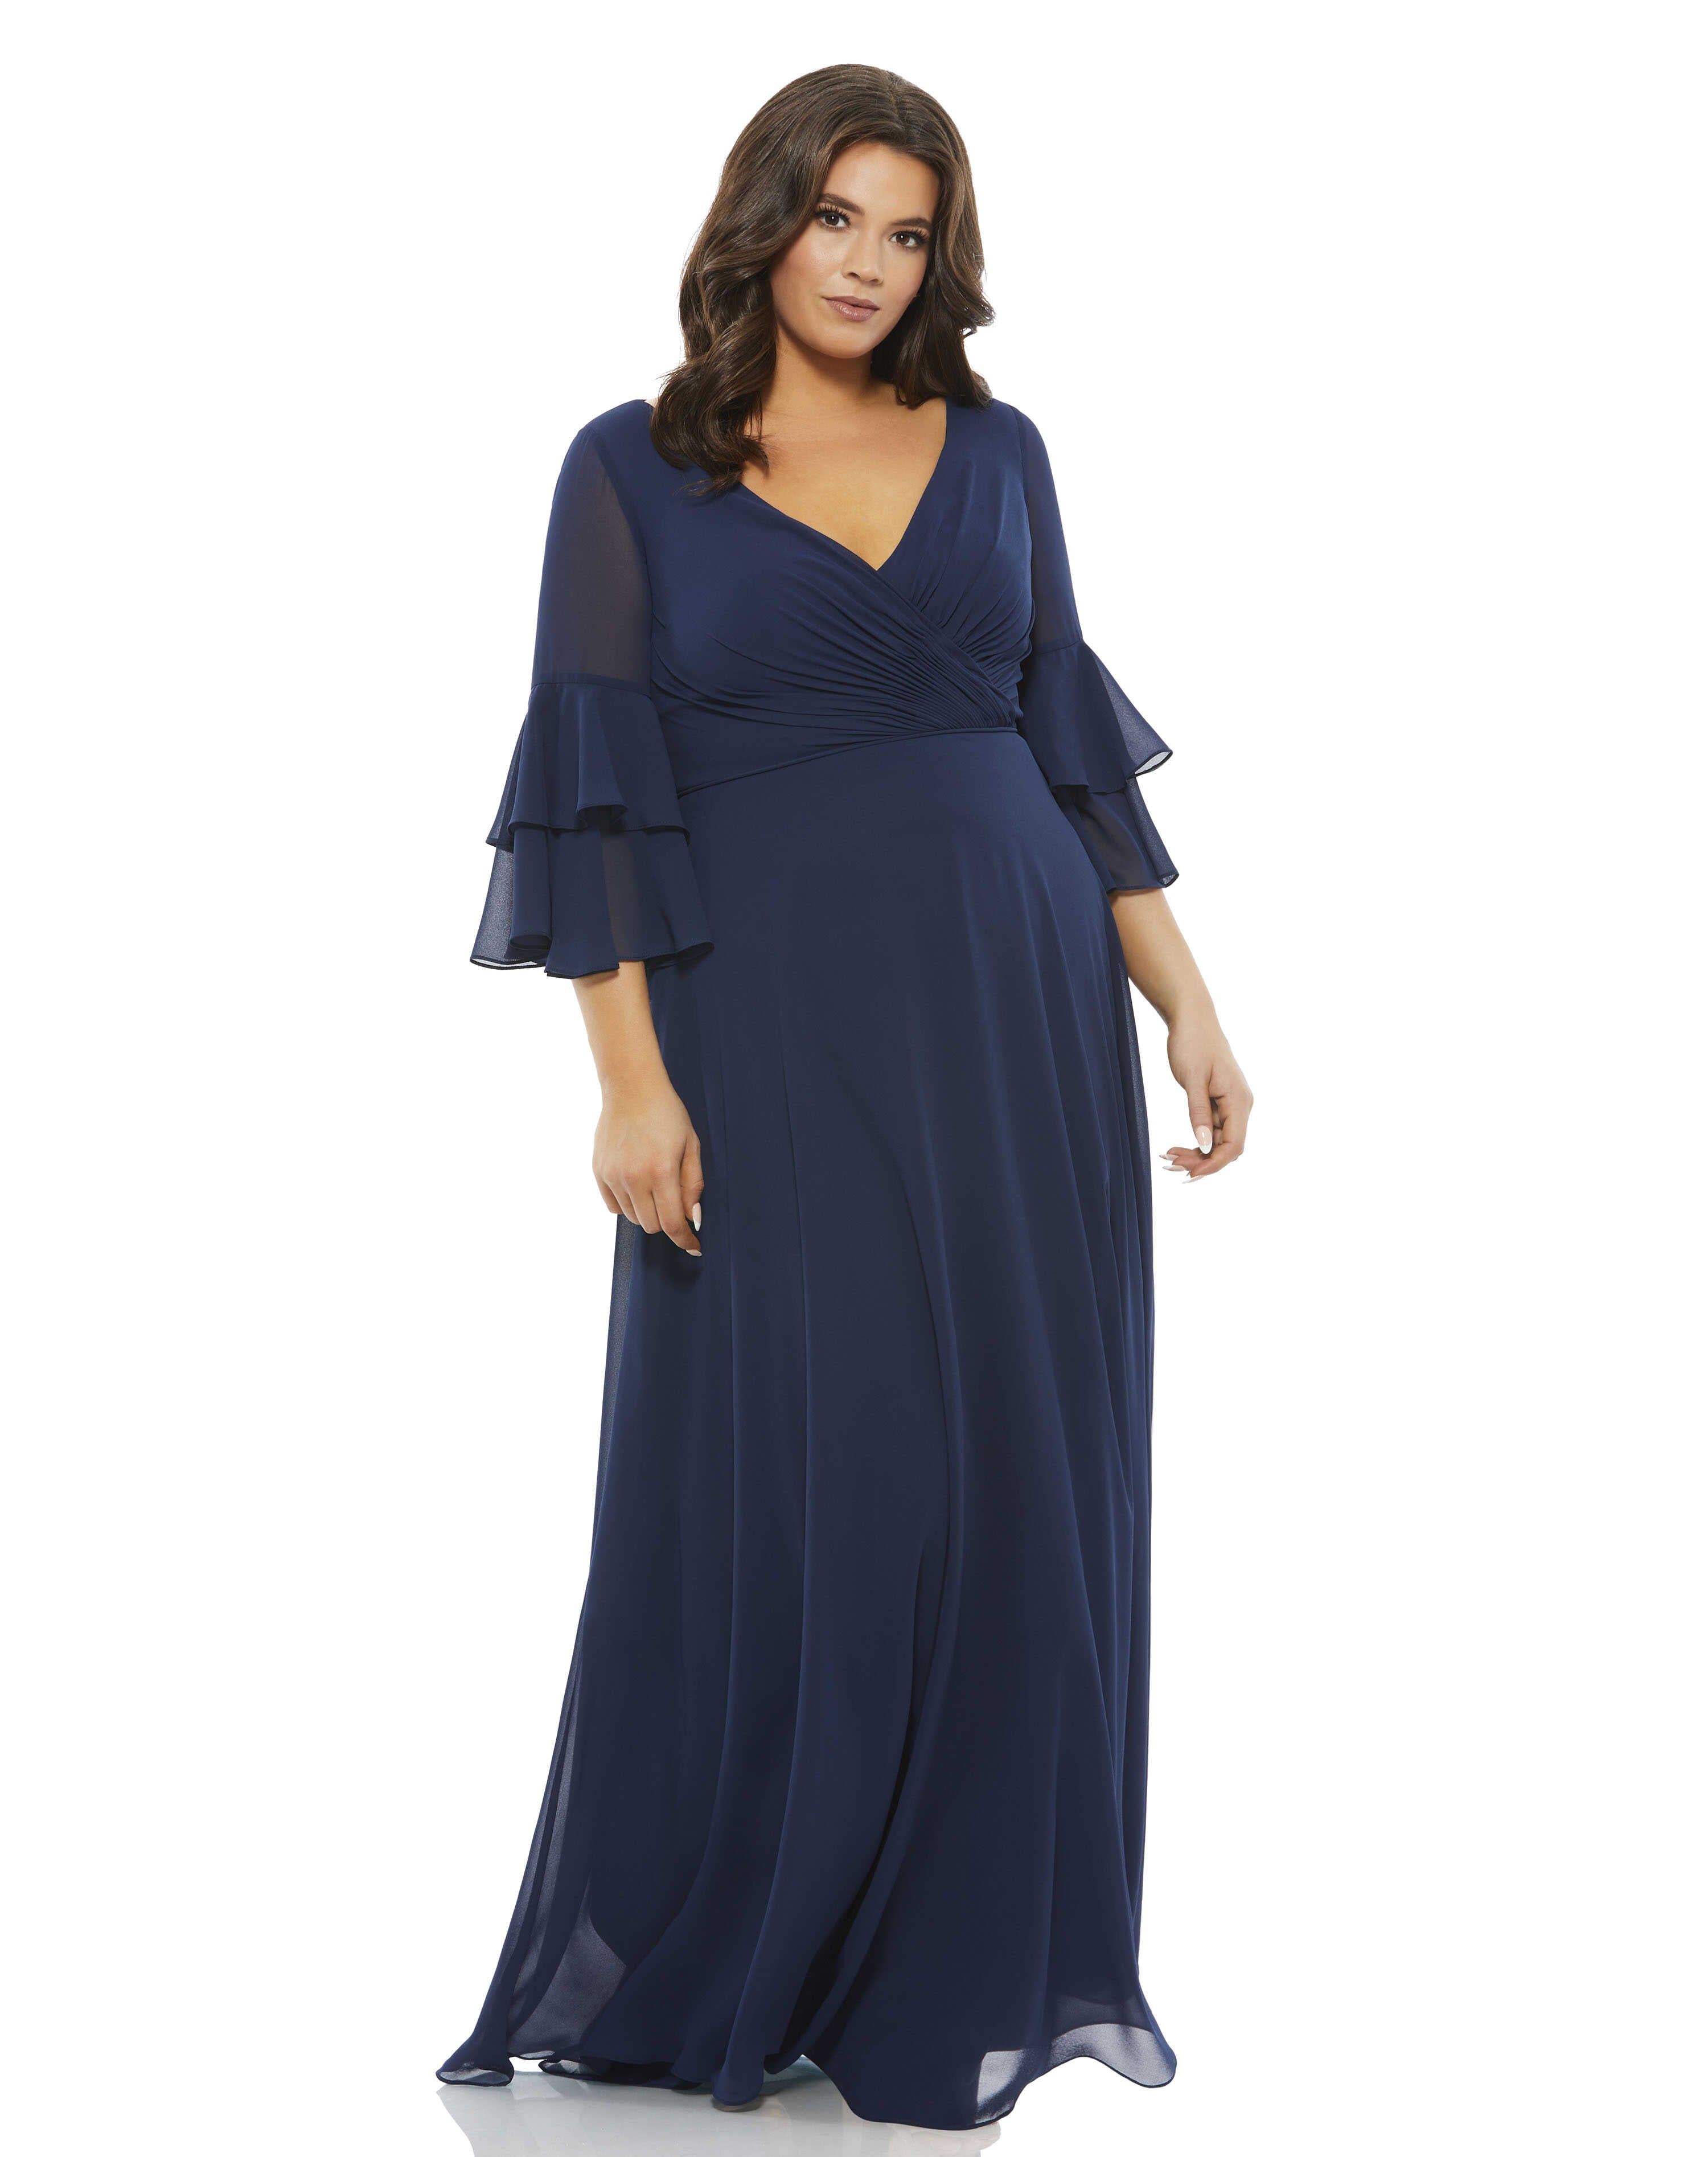 Pleated Bell Sleeve Chiffon Gown (Plus)